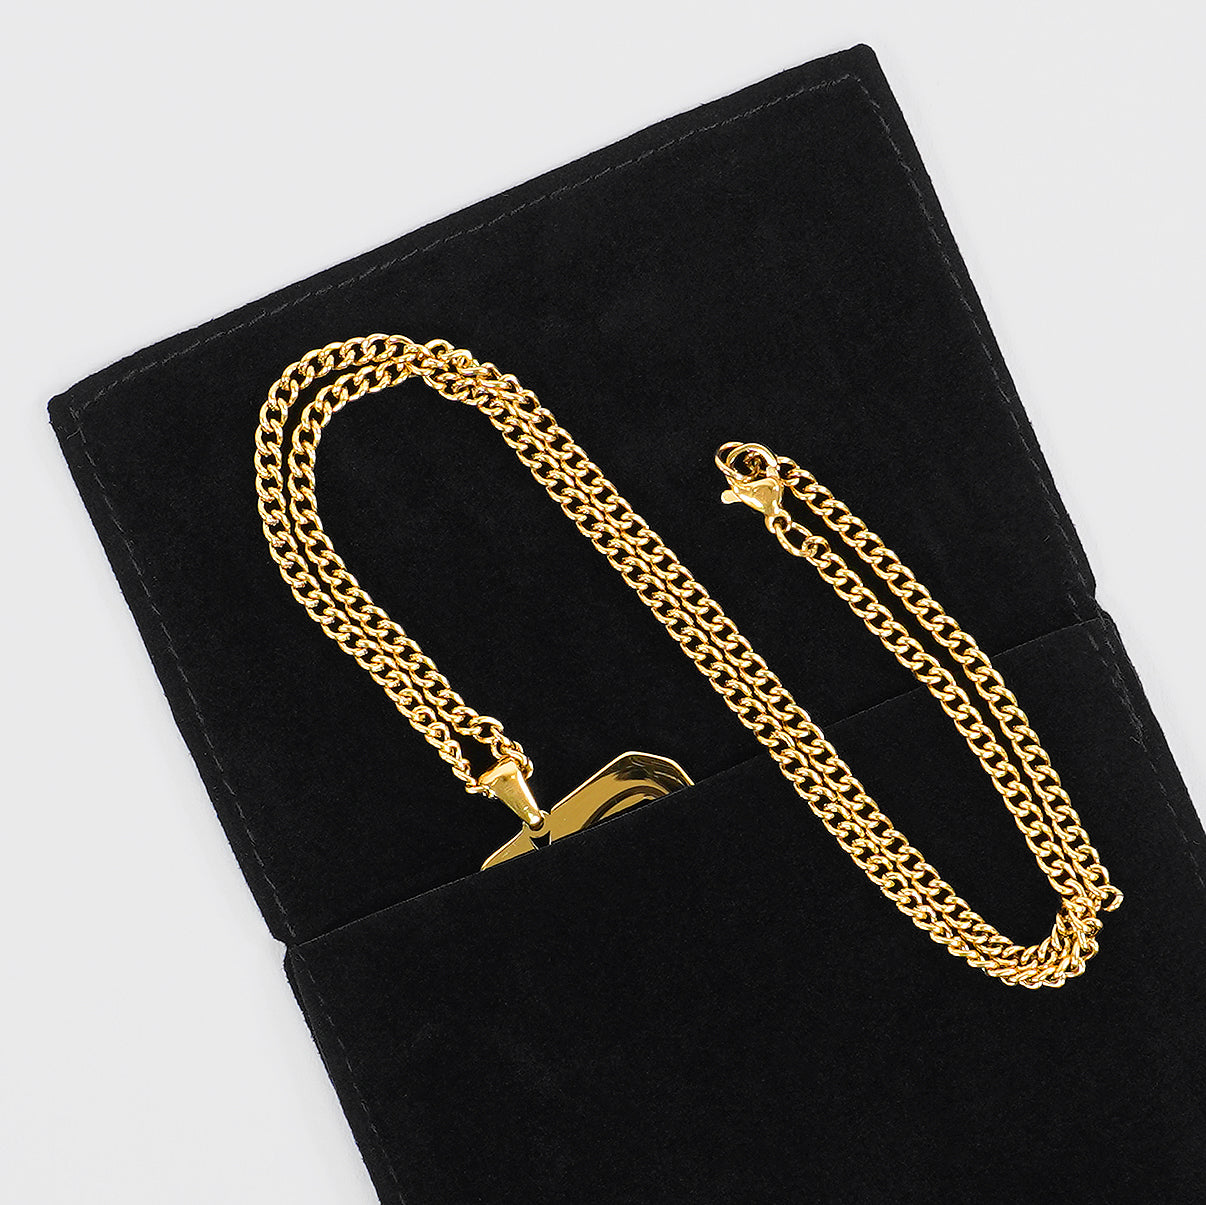 16 Number Pendant with Chain Necklace - Gold Plated Stainless Steel